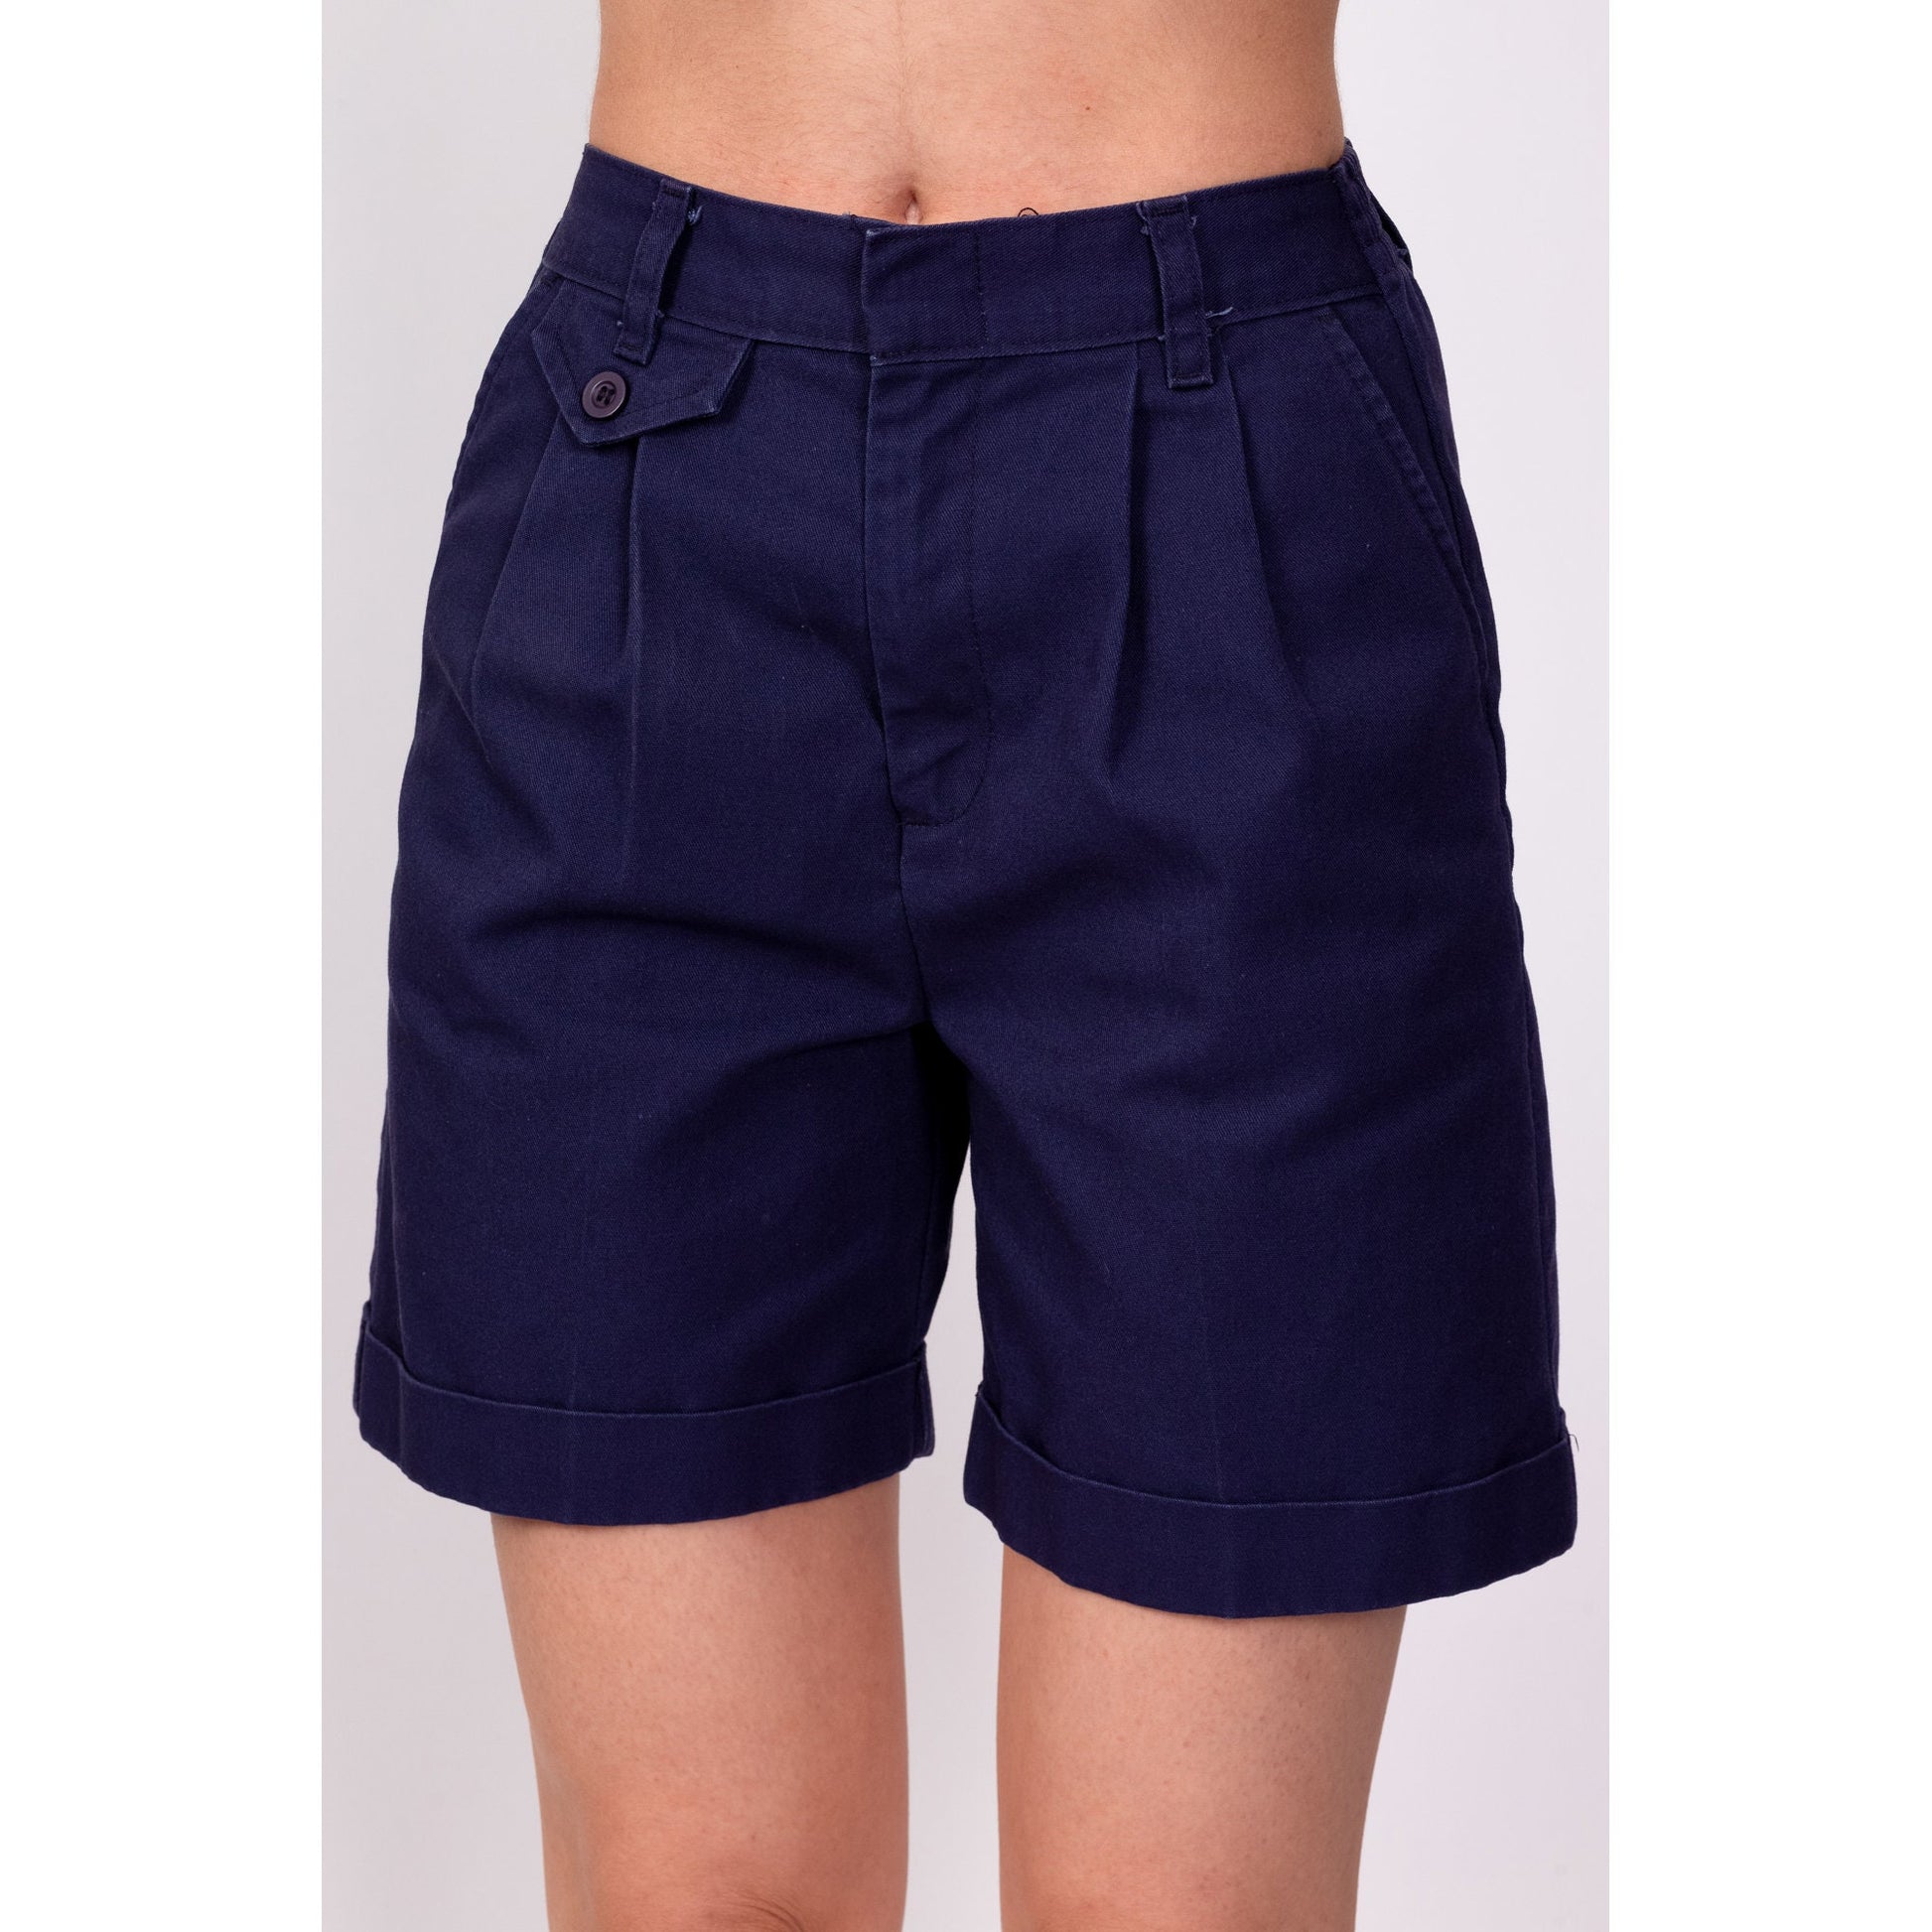 80s Navy Blue Pleated Shorts - Petite XS, 22"-24" 